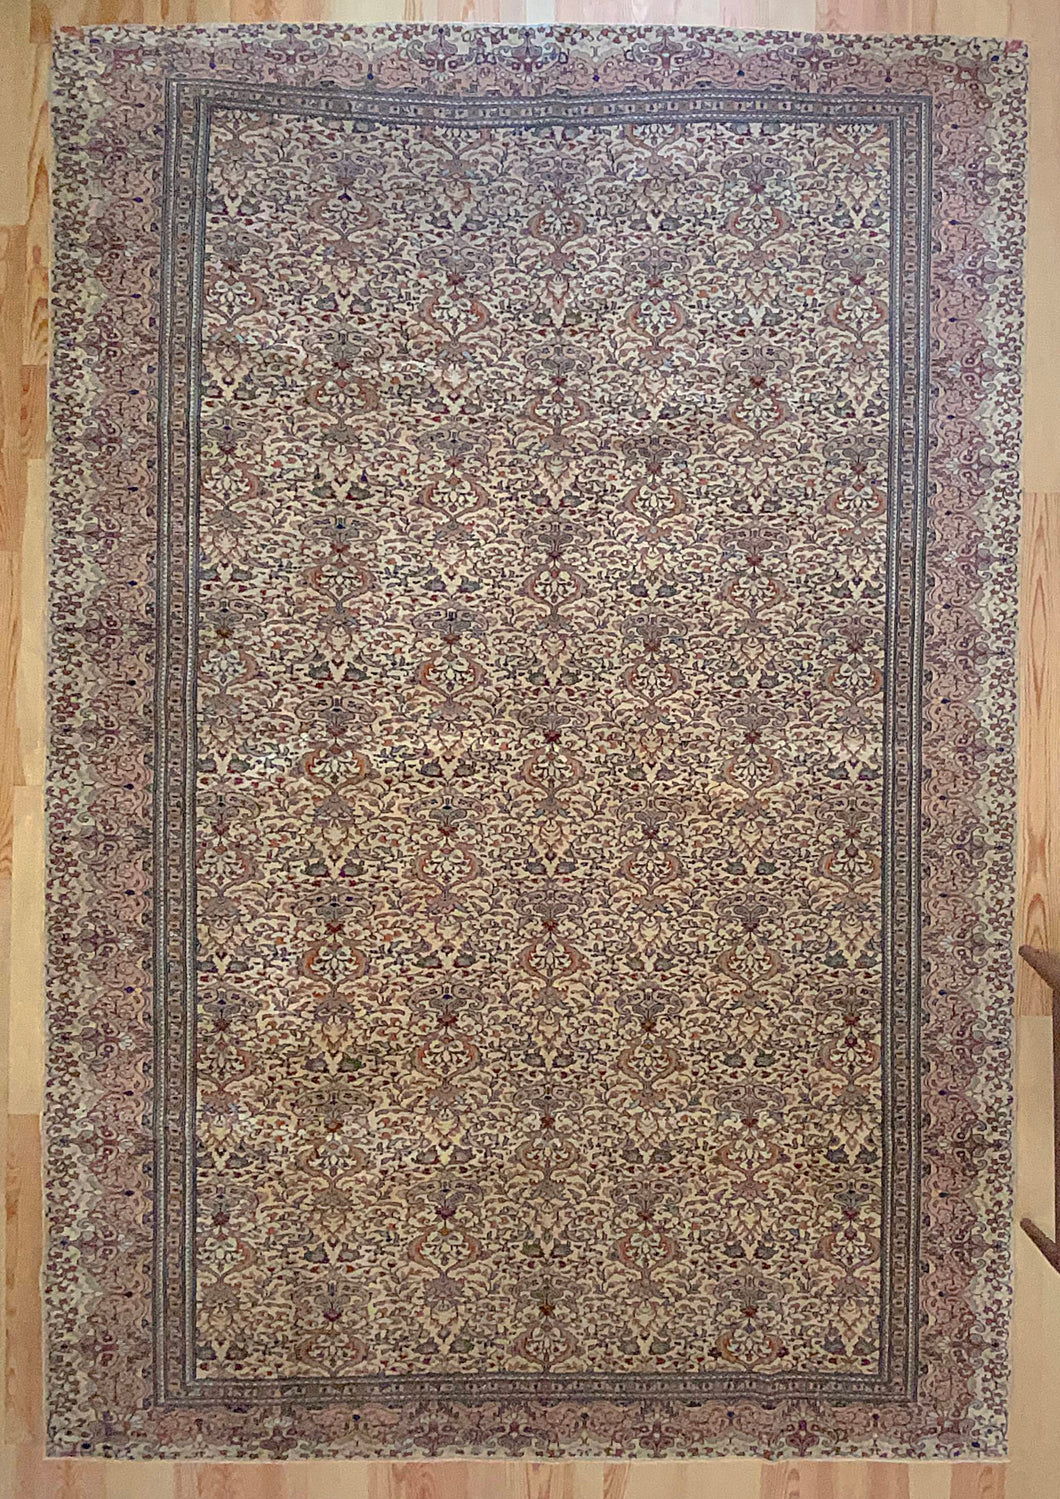 8x12 Vintage Central Anatolian 'Kayseri' Turkish Area Rug | Allover Symmetrical Floral Design with Palmettes and Vines Intricate Border | SKU 641